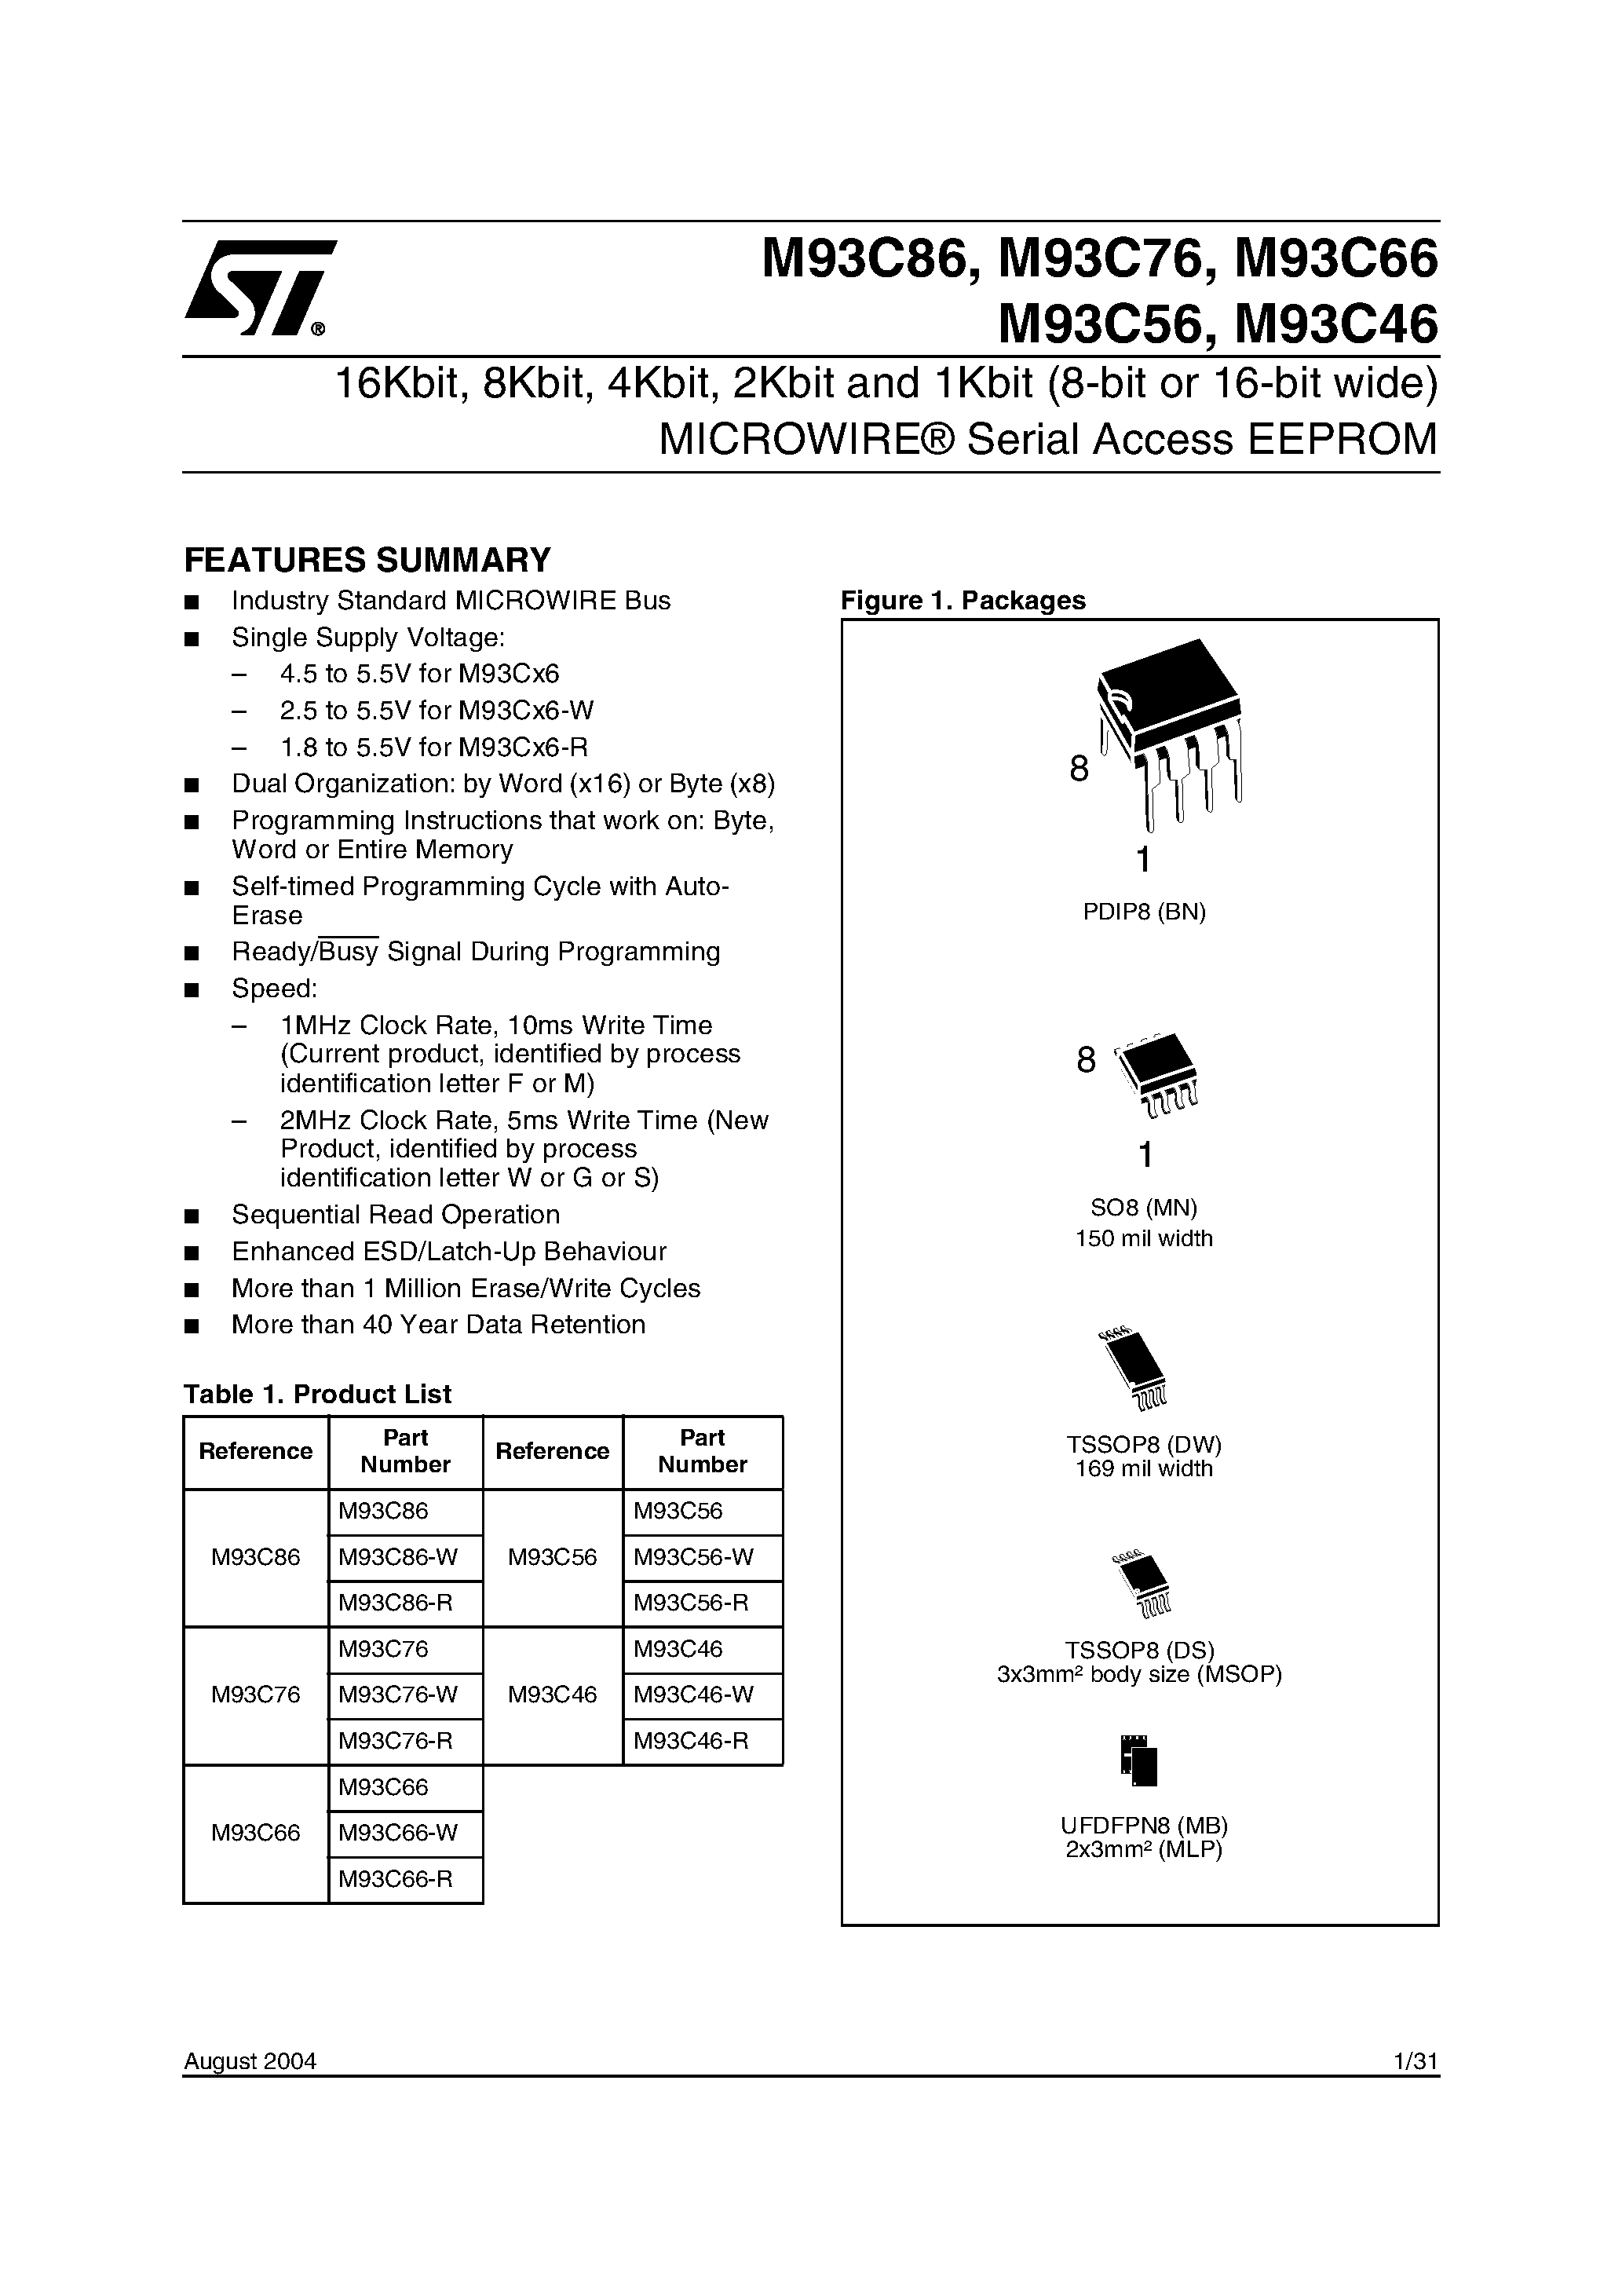 Datasheet M93C86 - 16Kbit / 8Kbit / 4Kbit / 2Kbit / 1Kbit and 256bit 8-bit or 16-bit wide page 1